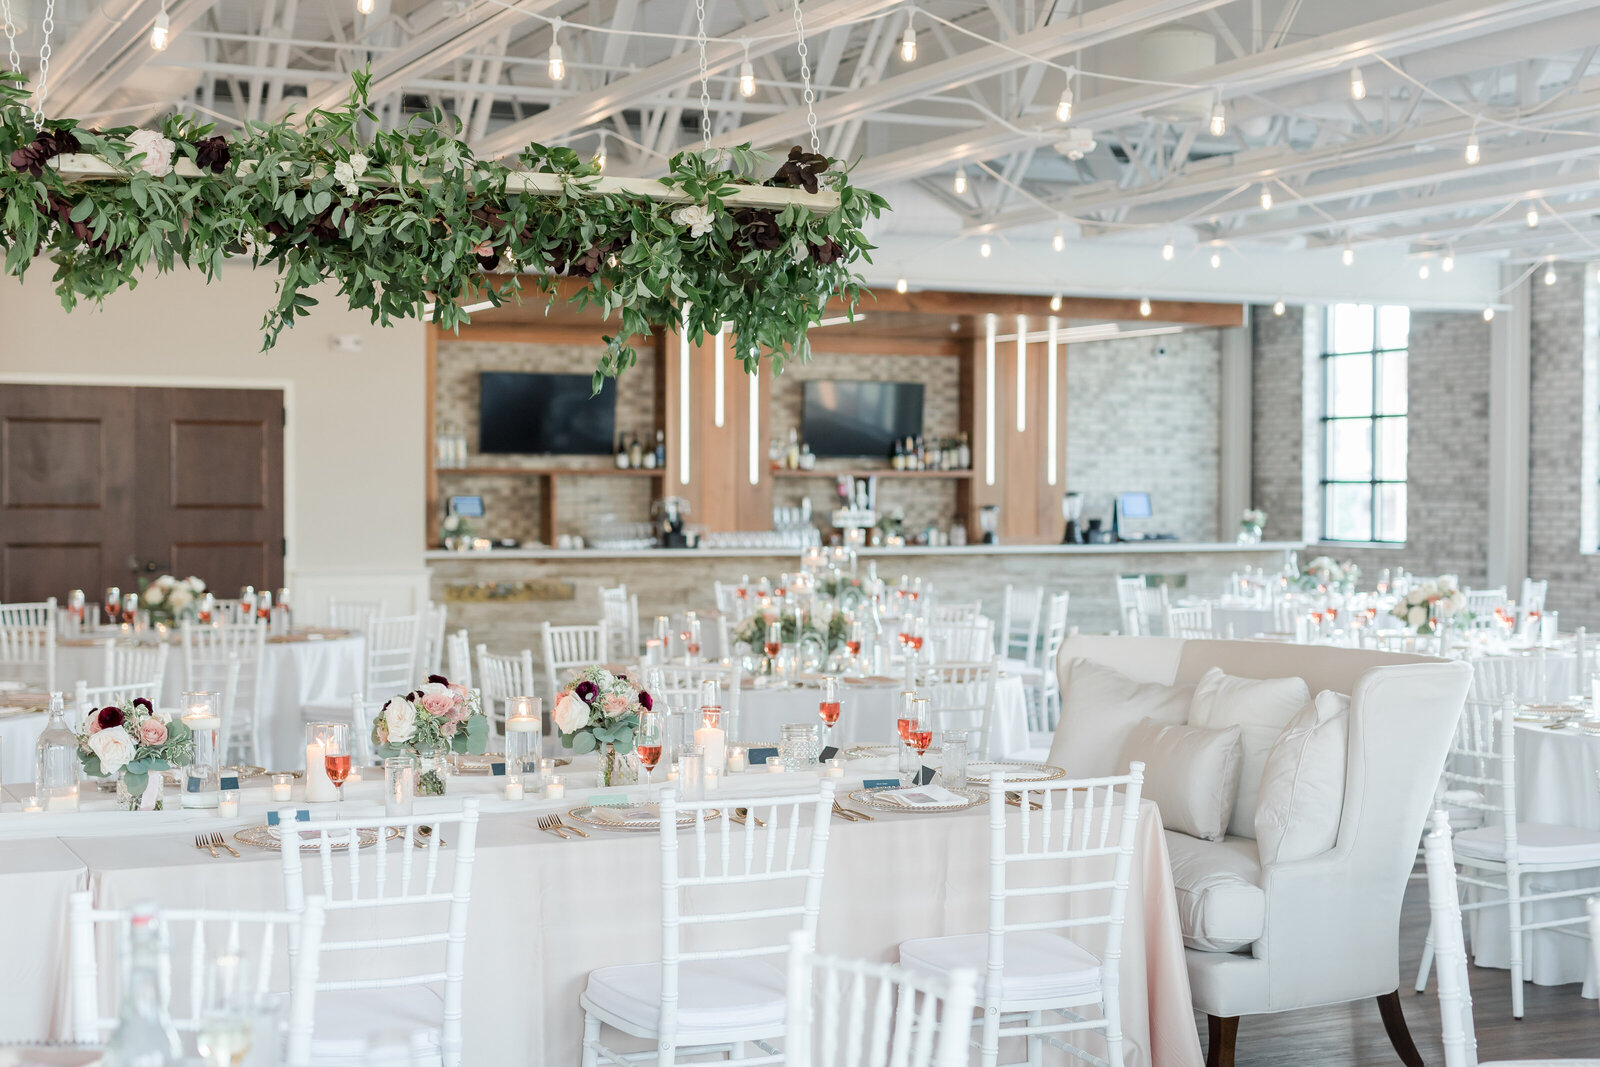 Wedding table scapes with greenery in lights